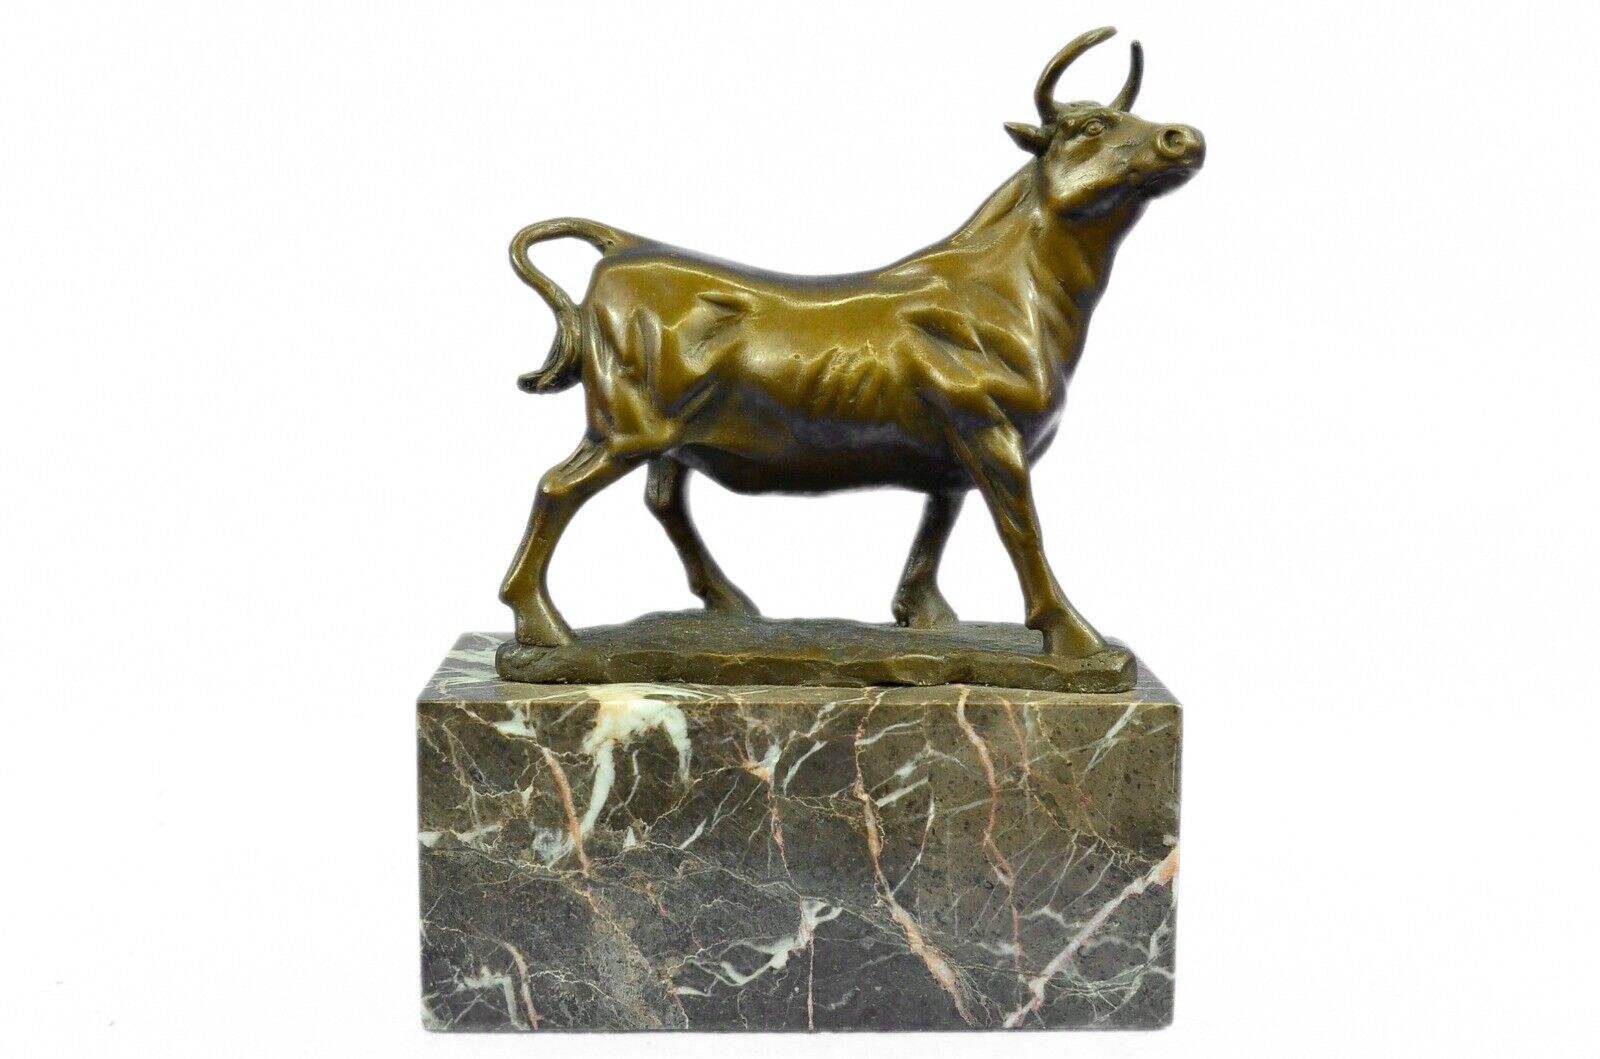 Handcrafted Statue Sculpture Hot cast bronze Signed Bull Deco style Figurine Art